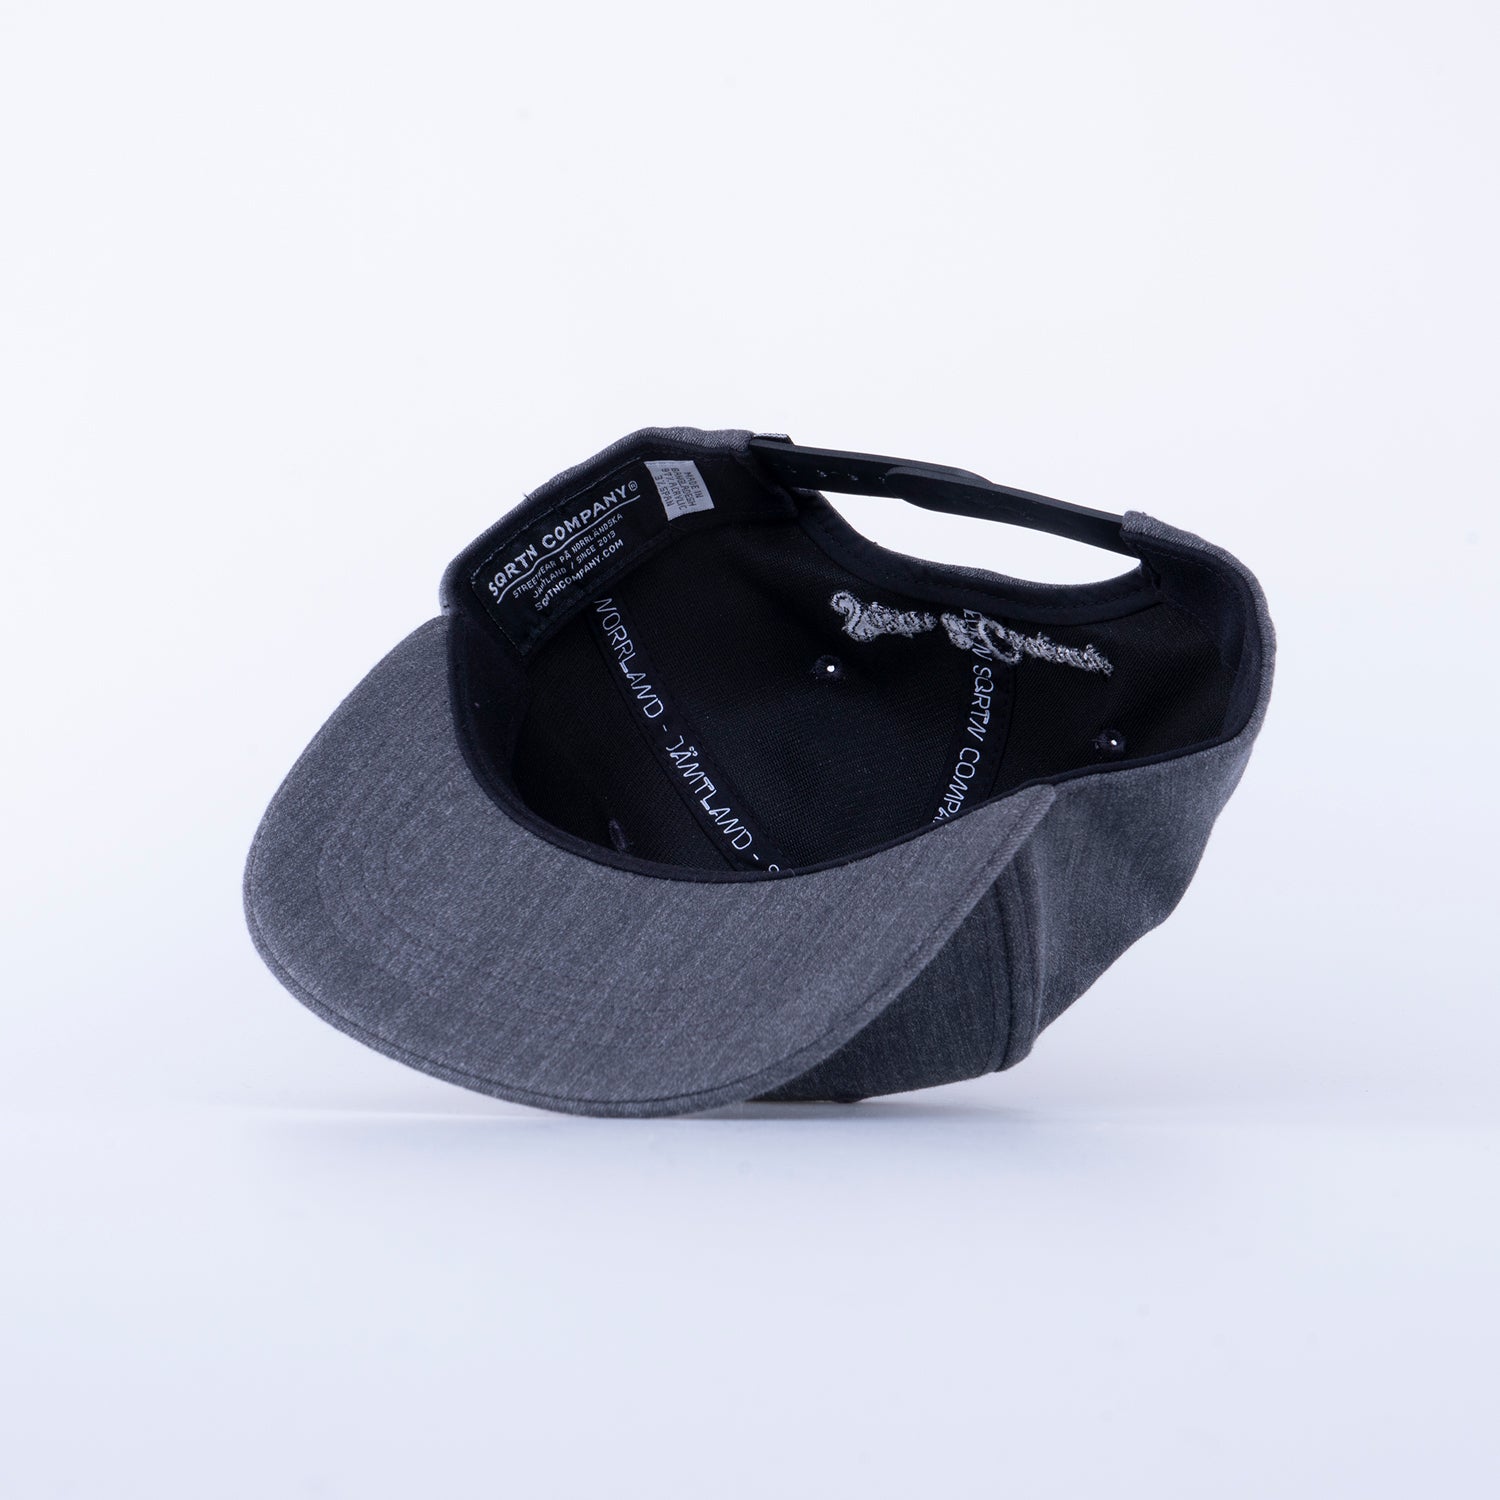 GREAT NORRLAND KIDS KEPS - CHARCOAL